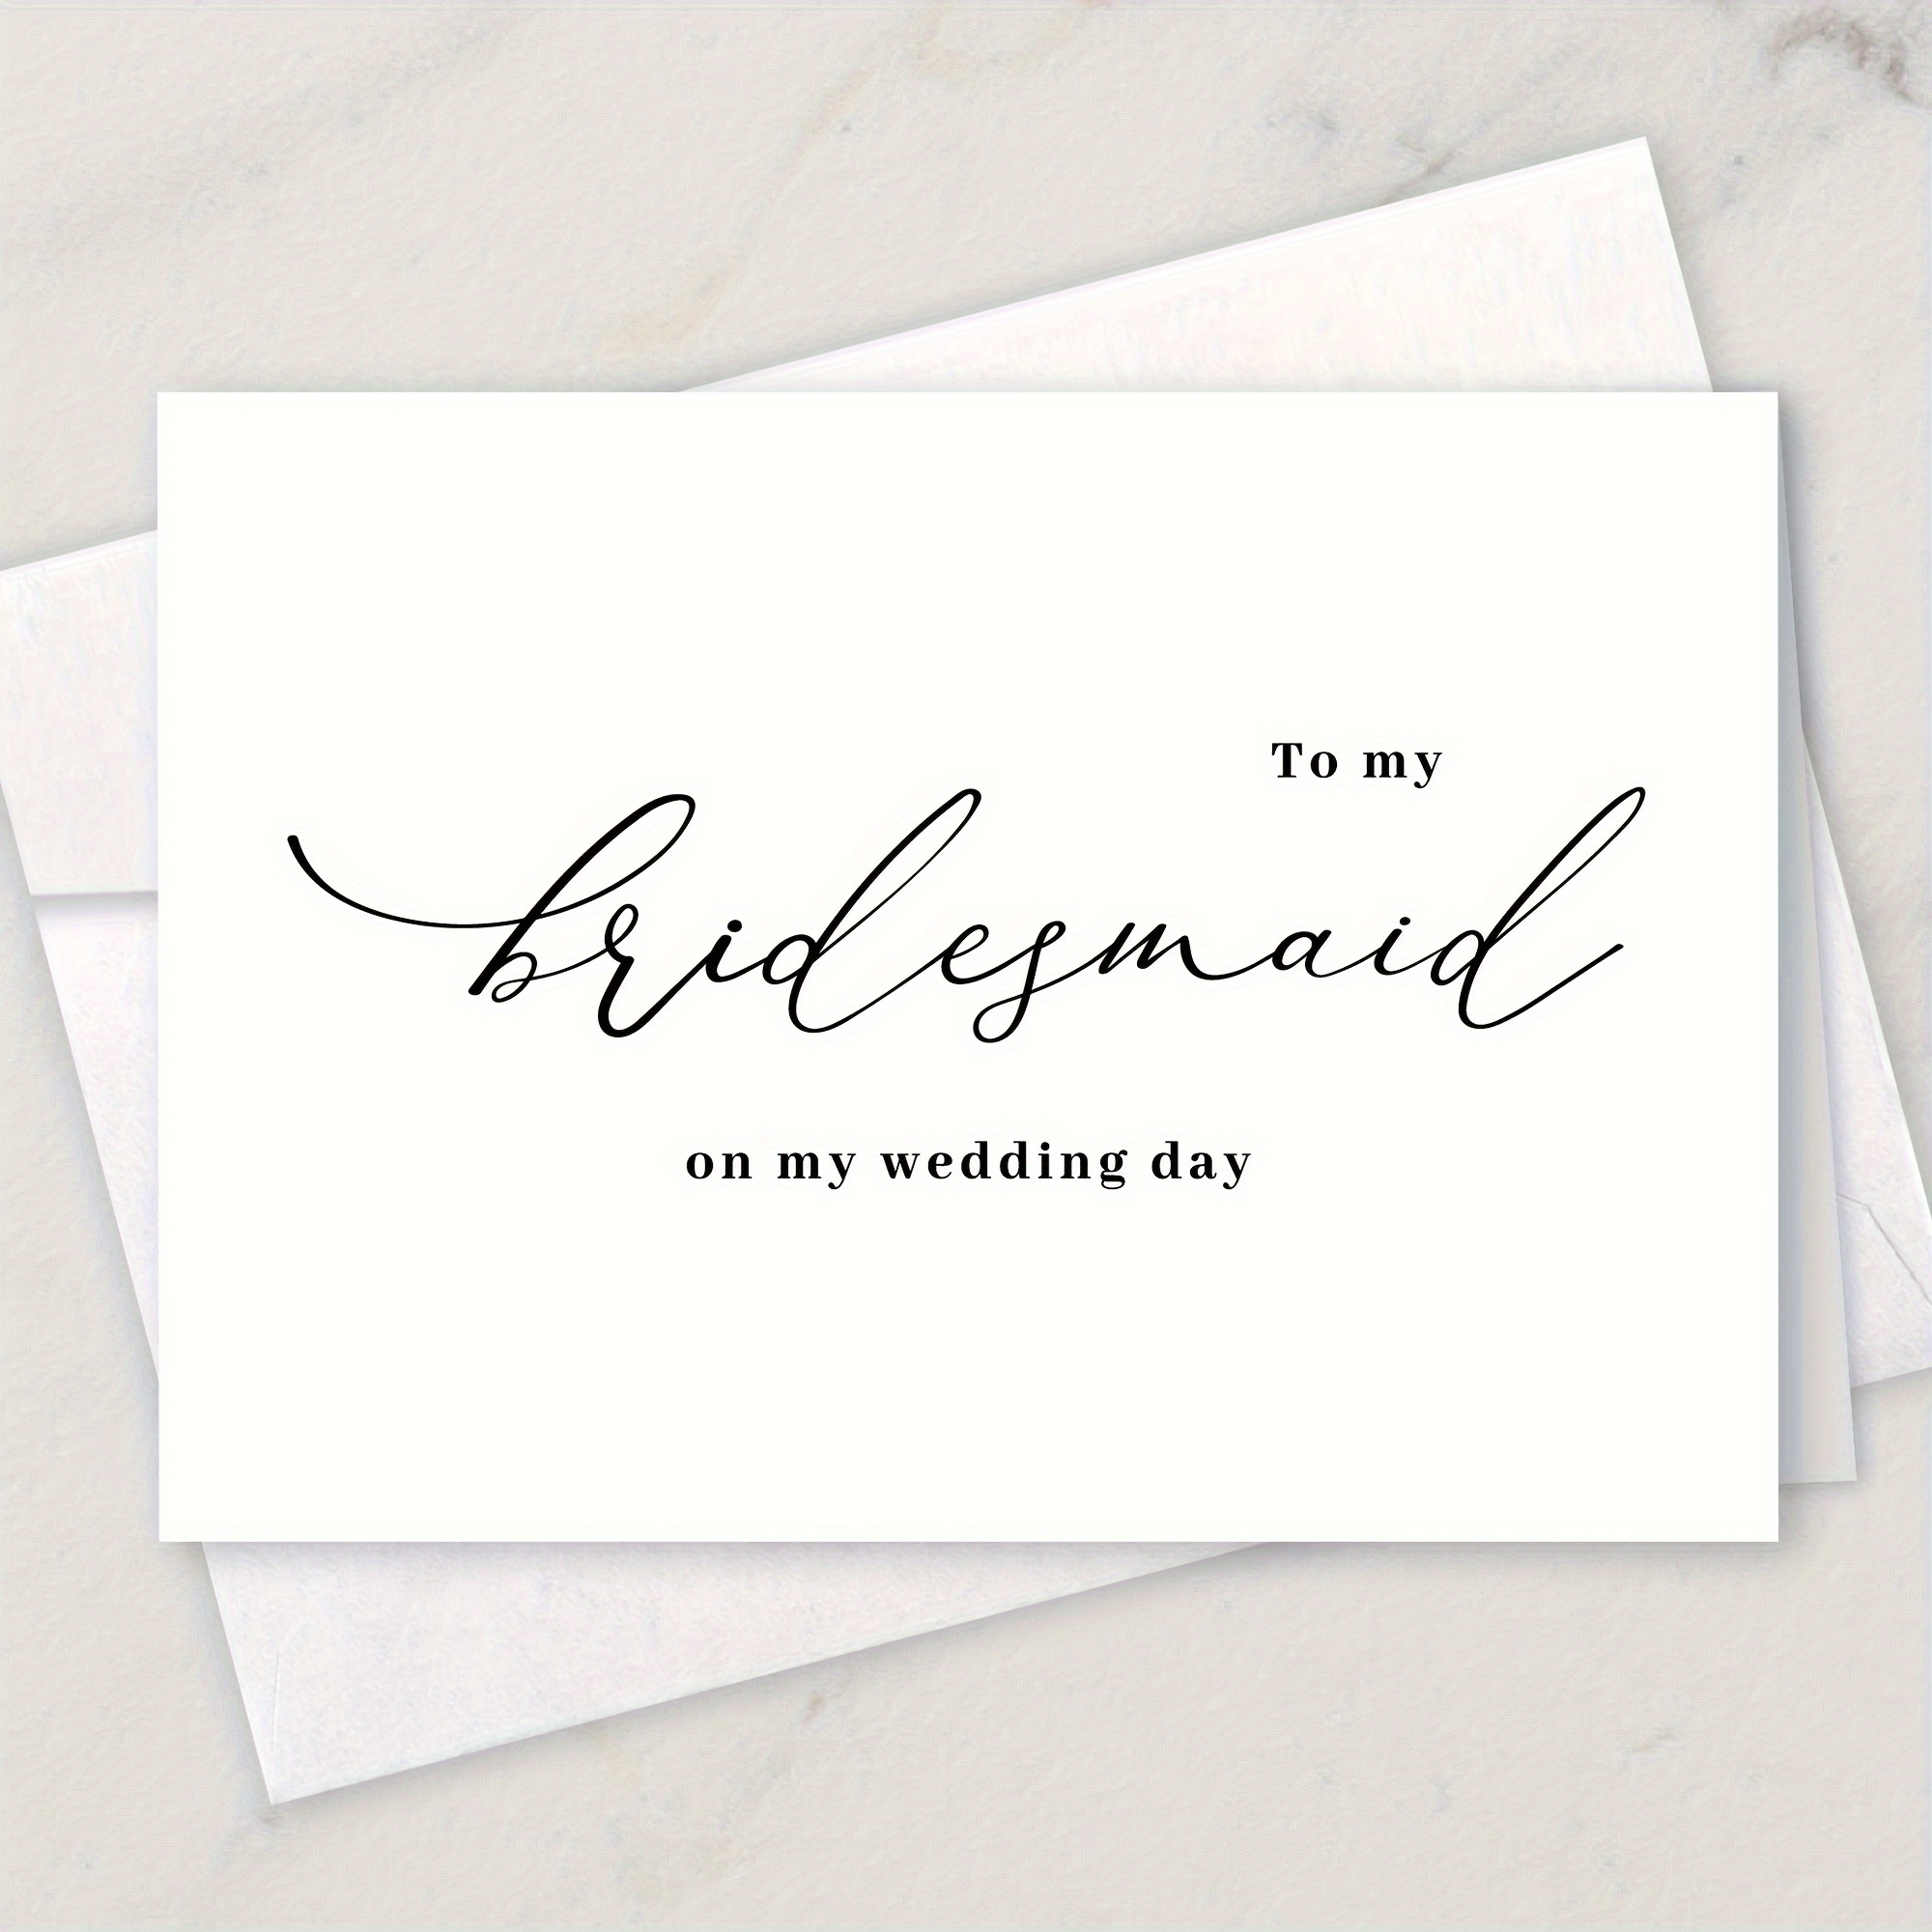 

Bridesmaid Wedding Day Card - "to My Bridesmaid On My Wedding Day" Greeting Card For Women, English Text, Perfect For Daily Office Use & Wedding Celebrations - 1pc